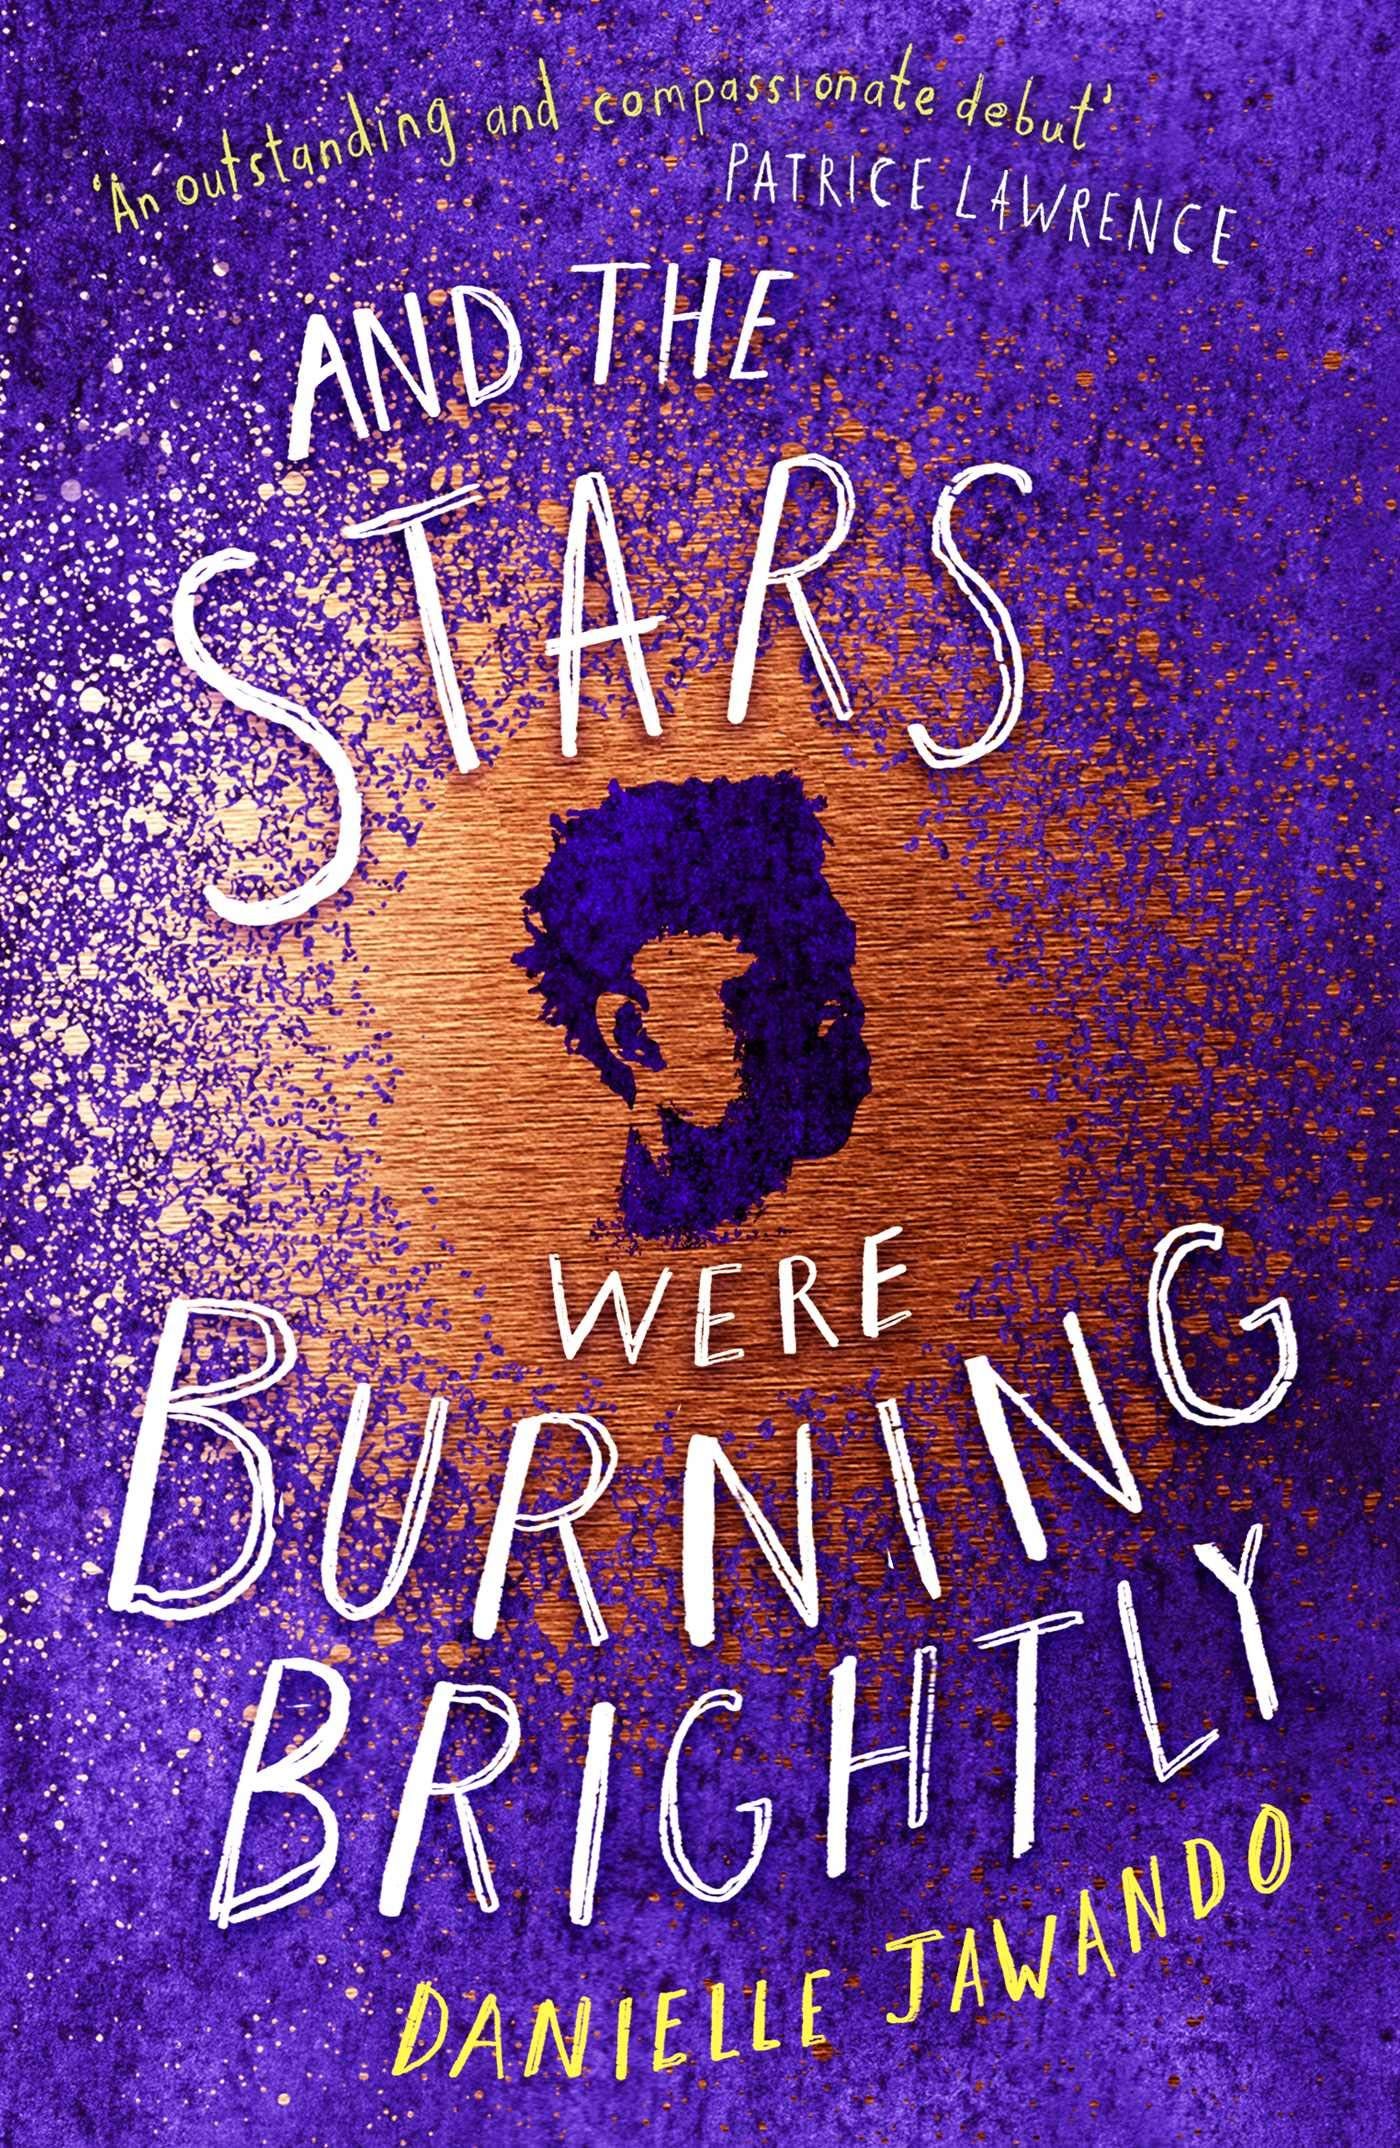 Cover of And the Stars Were Burning Brightly by Danielle Jawando